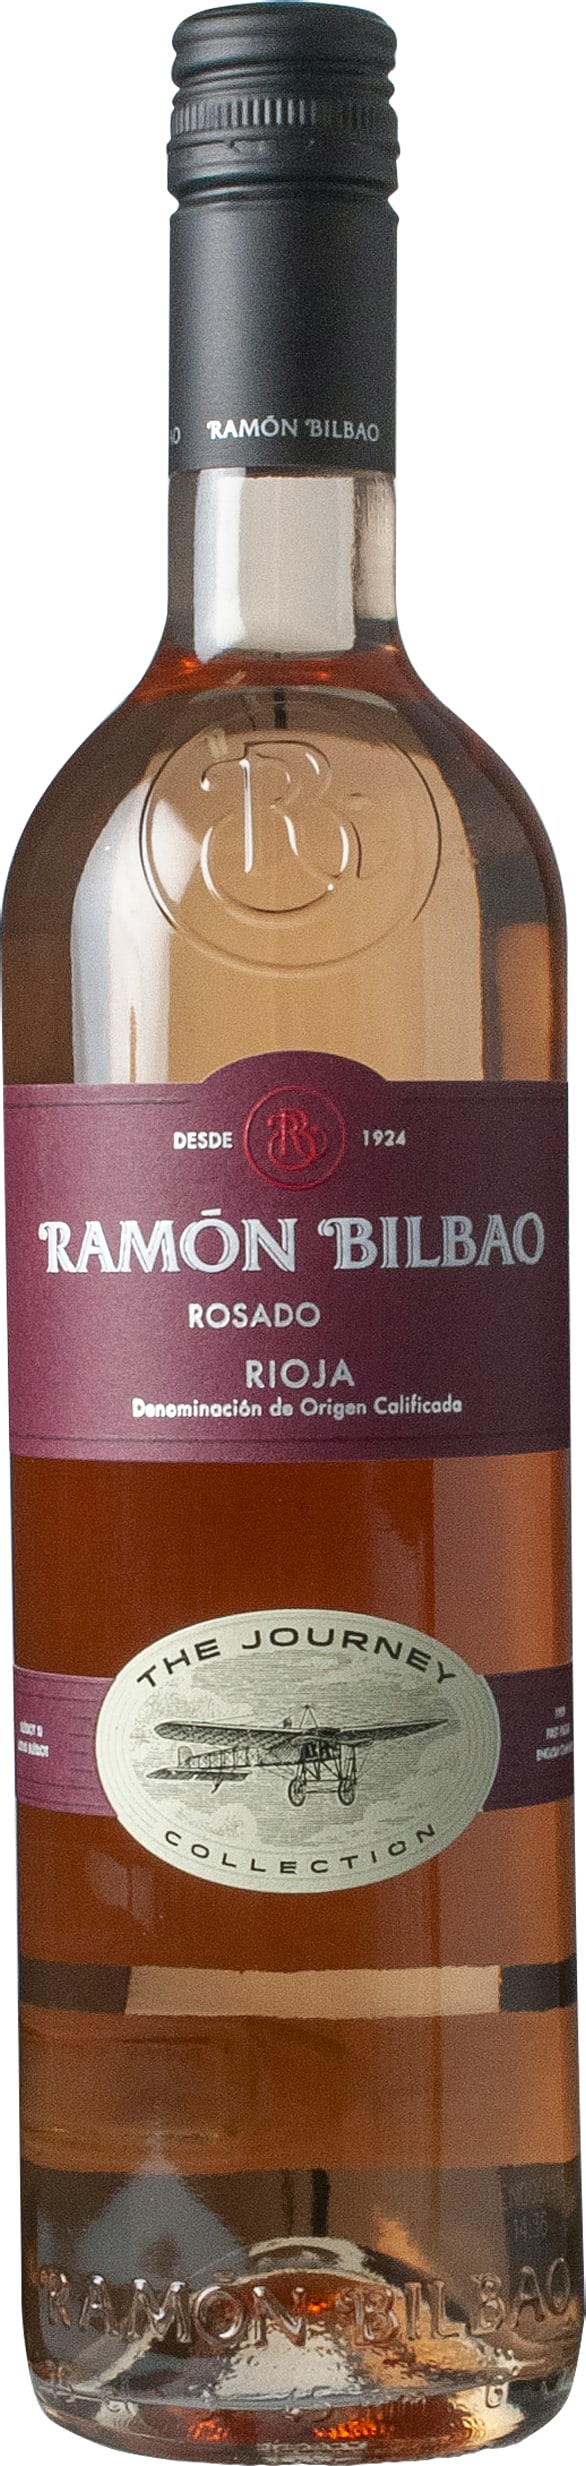 Ramon Bilbao Journey Collection Rose 2022 75cl - Buy Ramon Bilbao Wines from GREAT WINES DIRECT wine shop